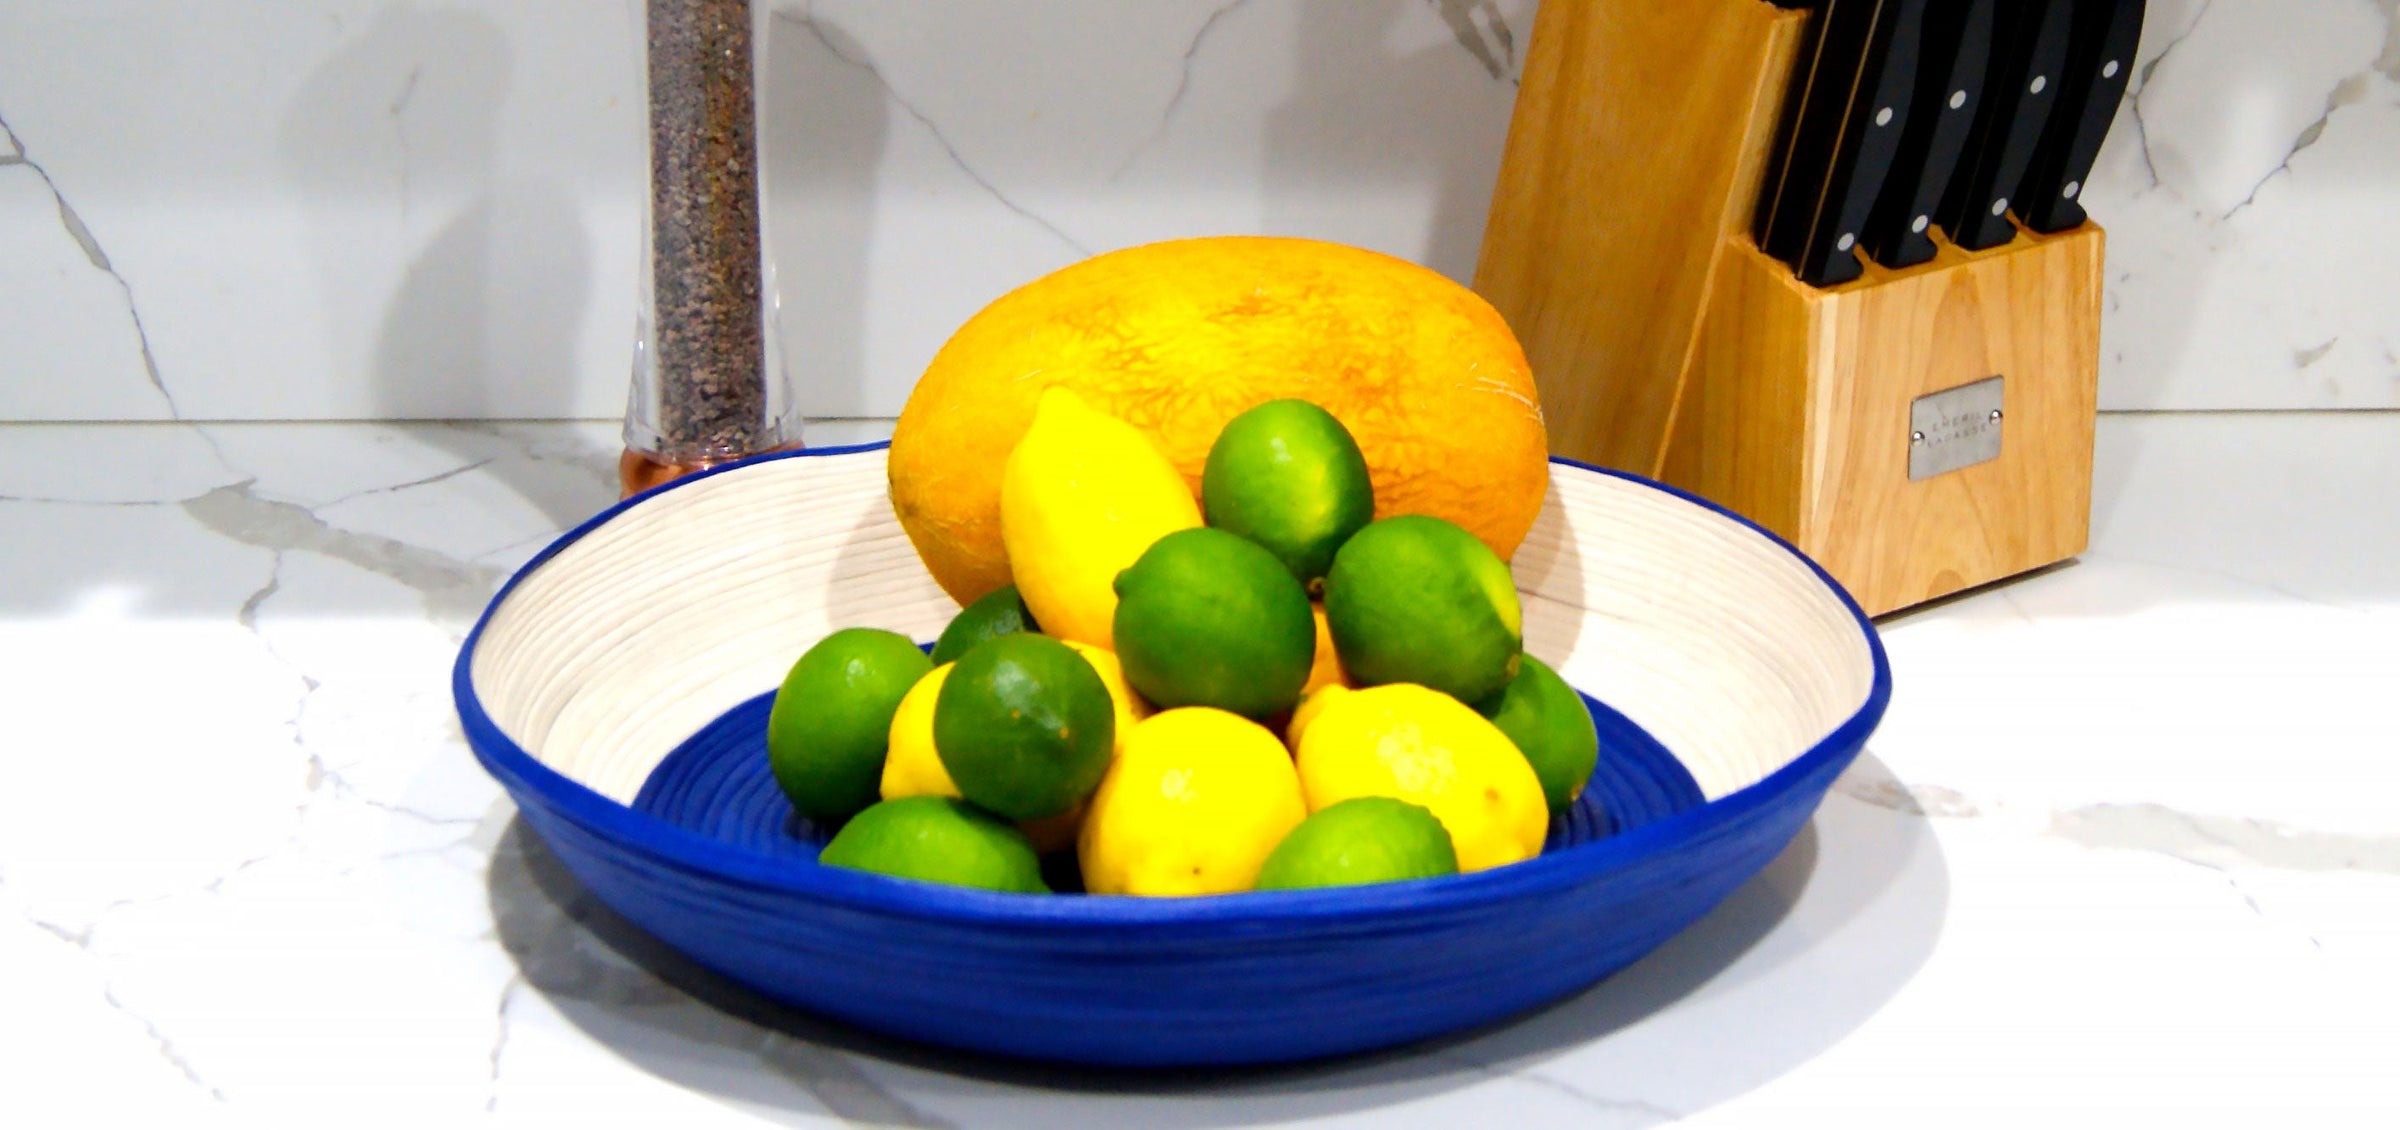 At We Are Portugal we know that the right fruit bowl can speak volumes to the presentation of your dining room and kitchen. That’s why we curate a collection of fruit bowls and baskets that come in all shapes, sizes, colors and styles. 